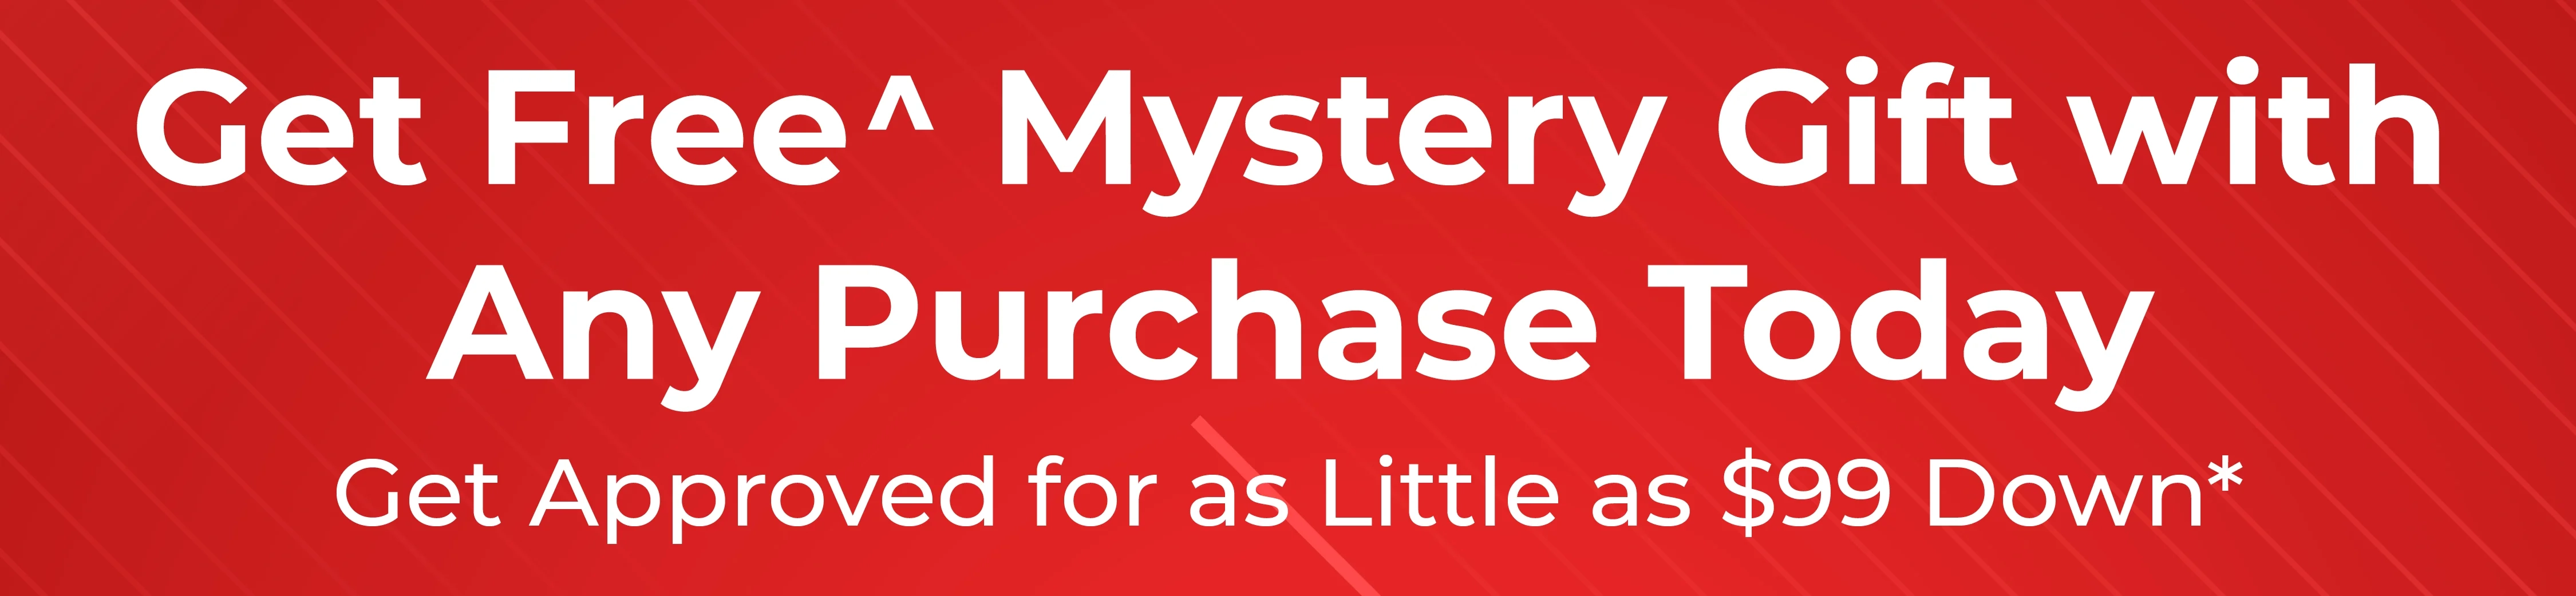 Get FREE^ Mystery Gift with Any Purchase Today